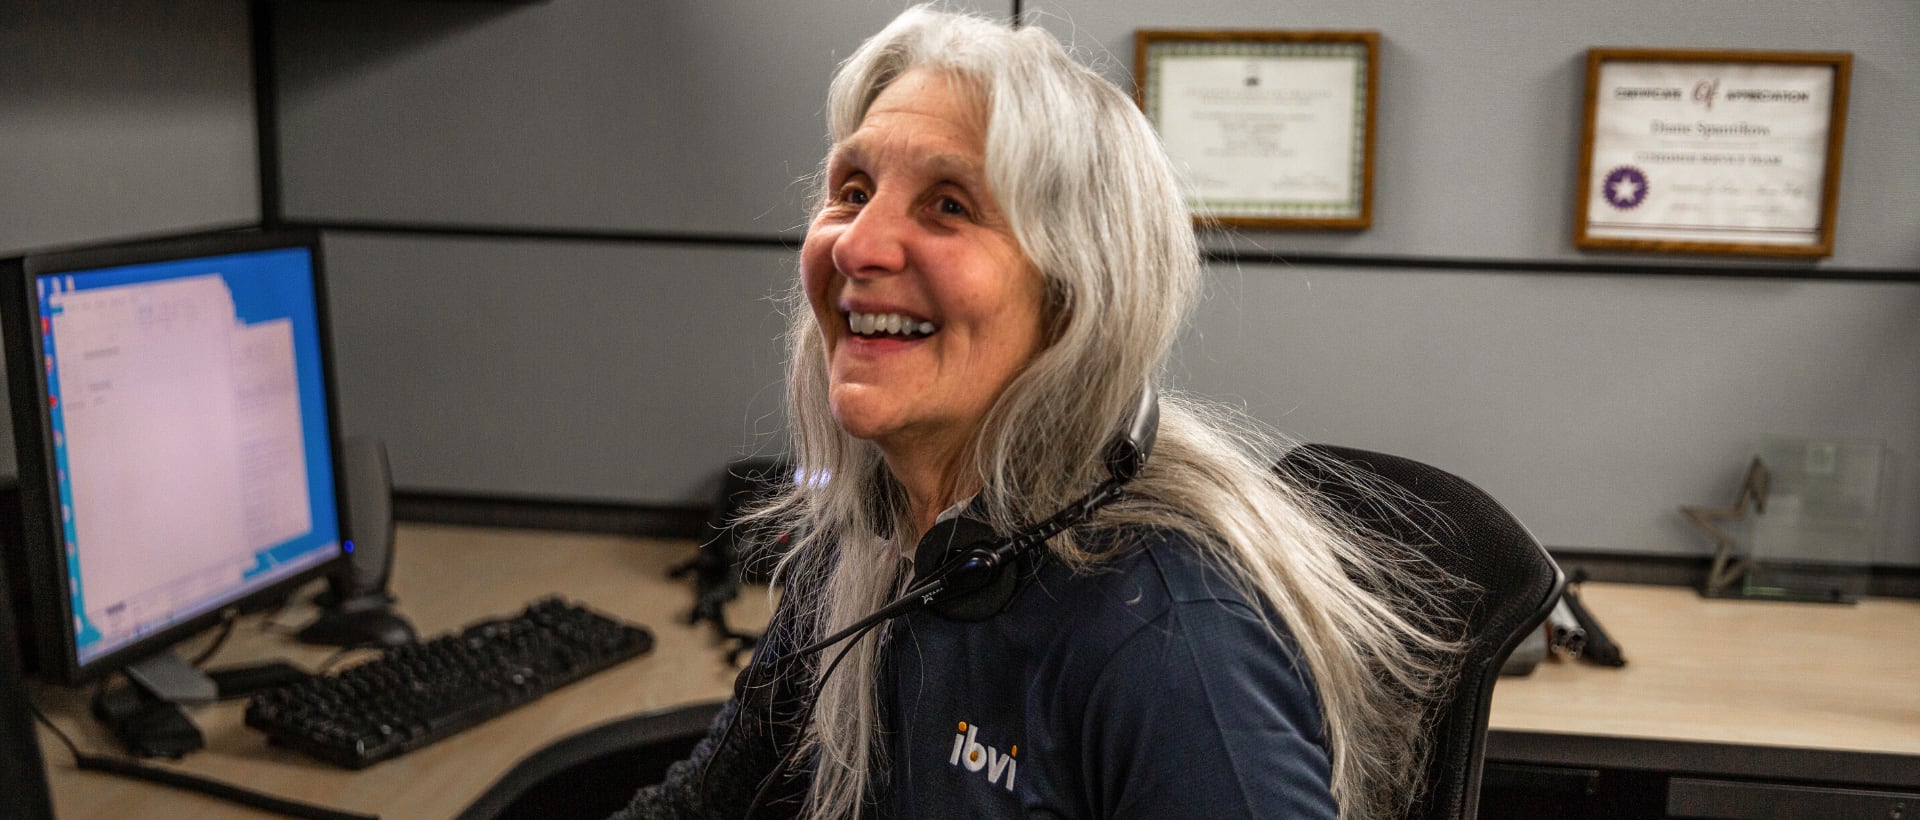 Diane S. of IBVI smiles at the camera while working on a computer